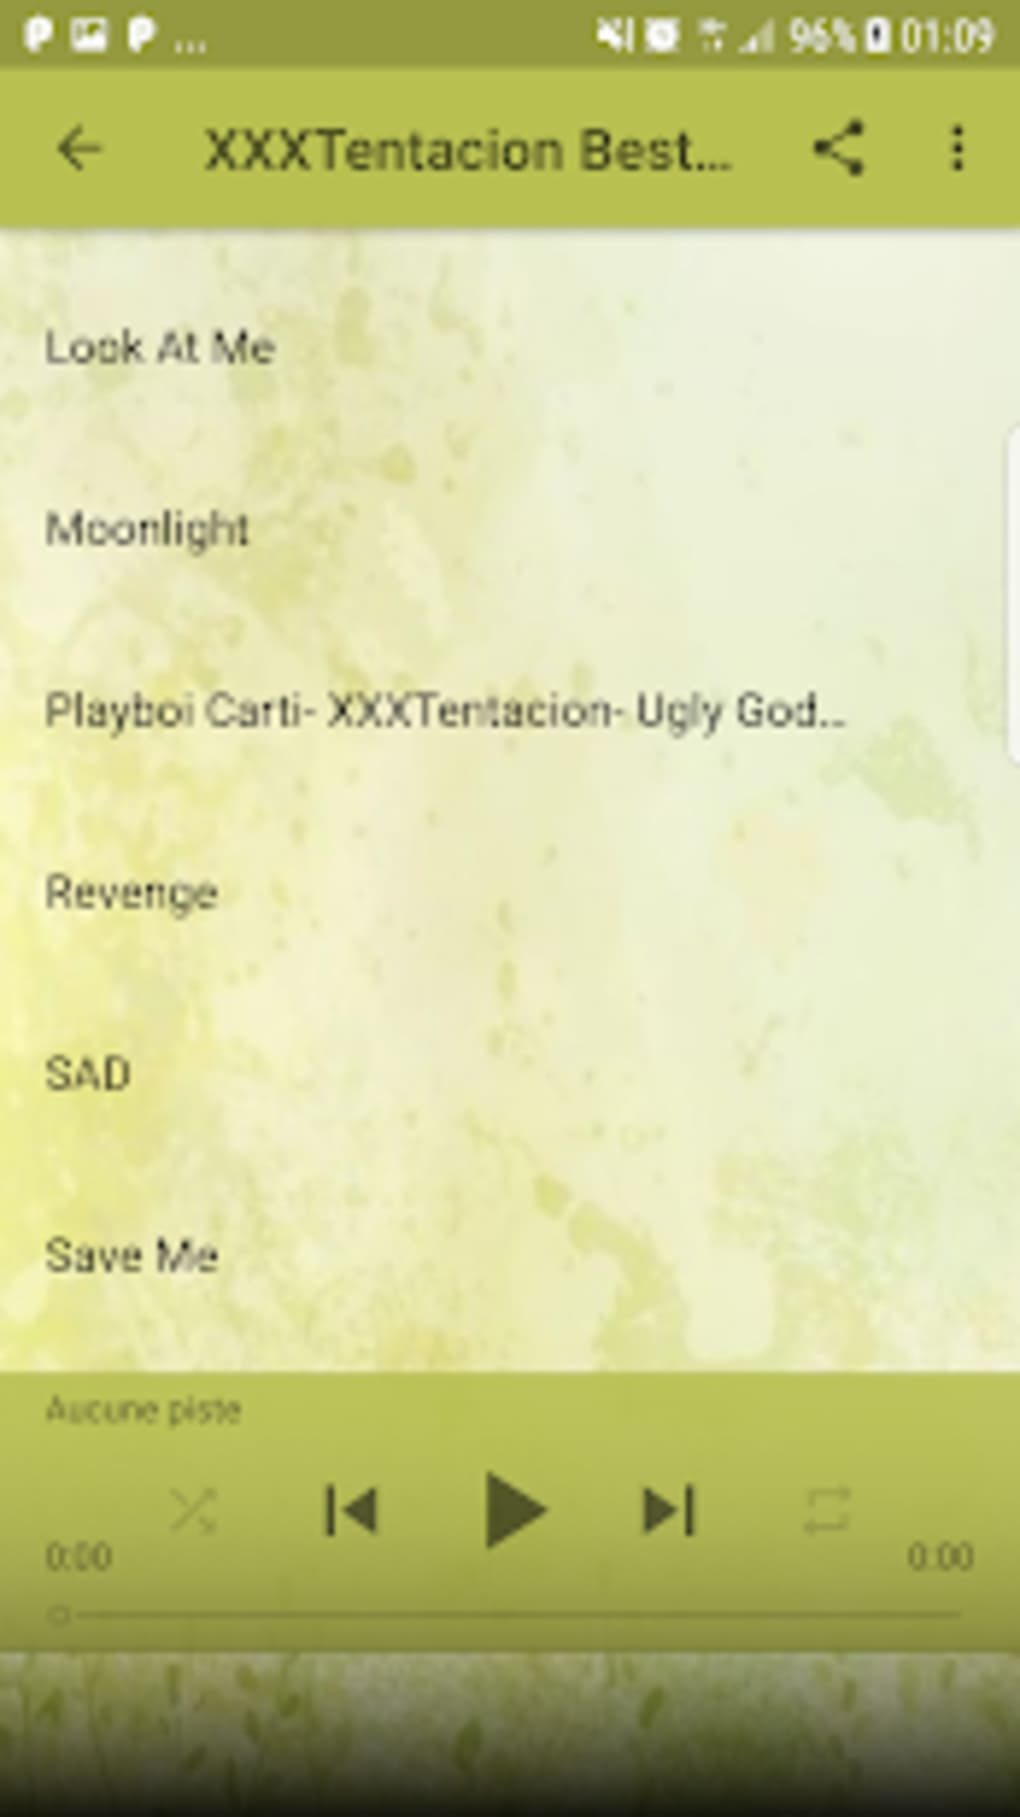 Xxxtentacion All Songs Without Internet 2019 Apk For Android